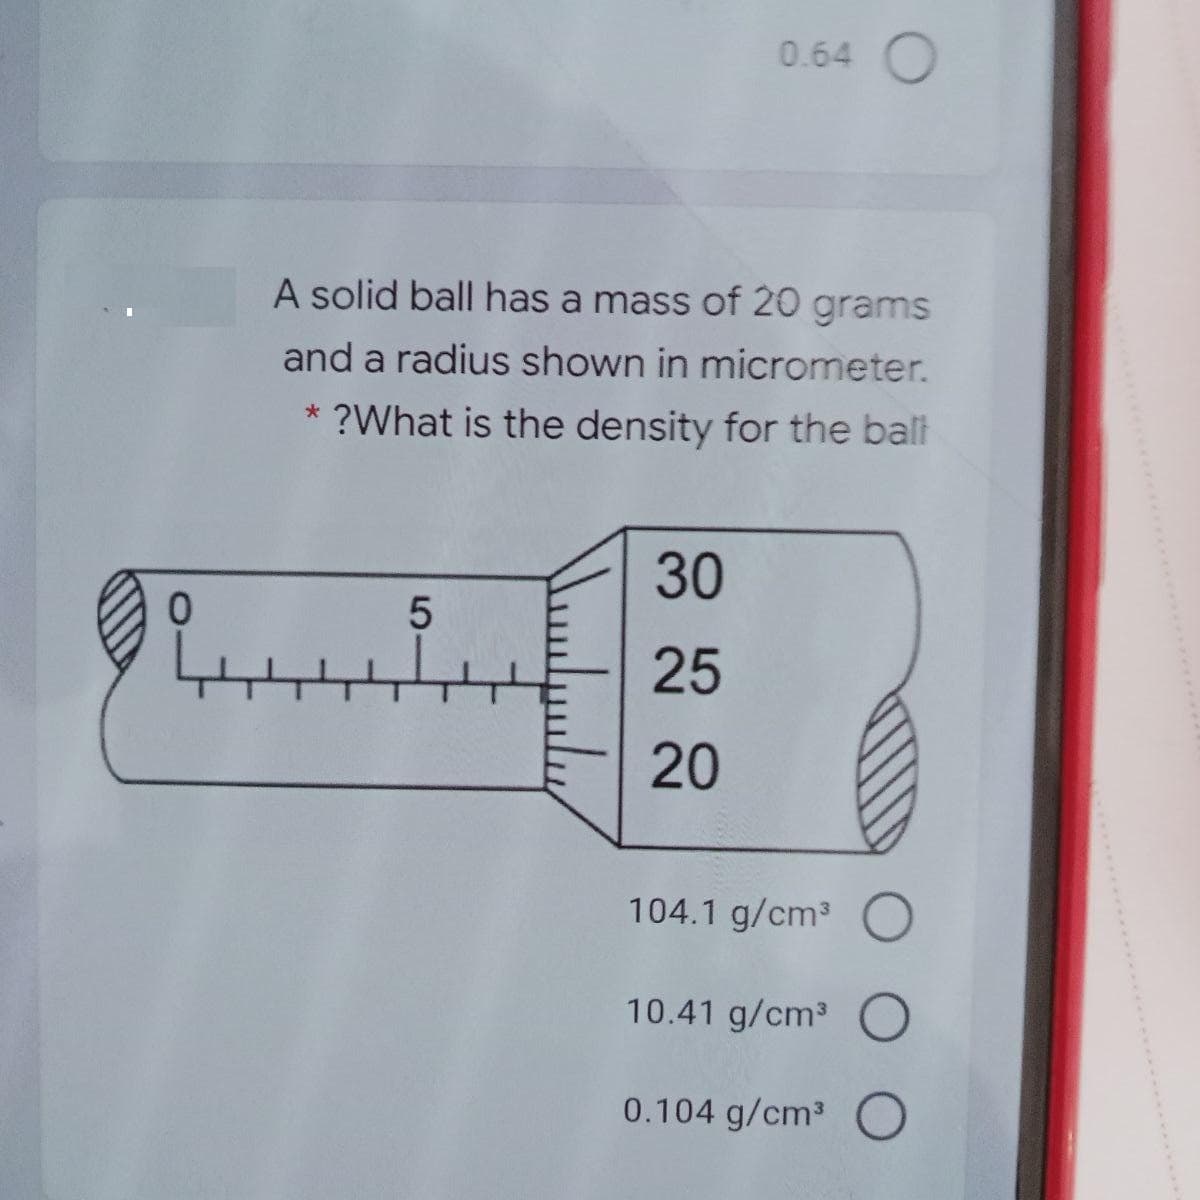 0.64 O
A solid ball has a mass of 20 grams
and a radius shown in micrometer.
* ?What is the density for the balt
30
25
20
104.1 g/cm3
10.41 g/cm3 O
0.104 g/cm3 O
